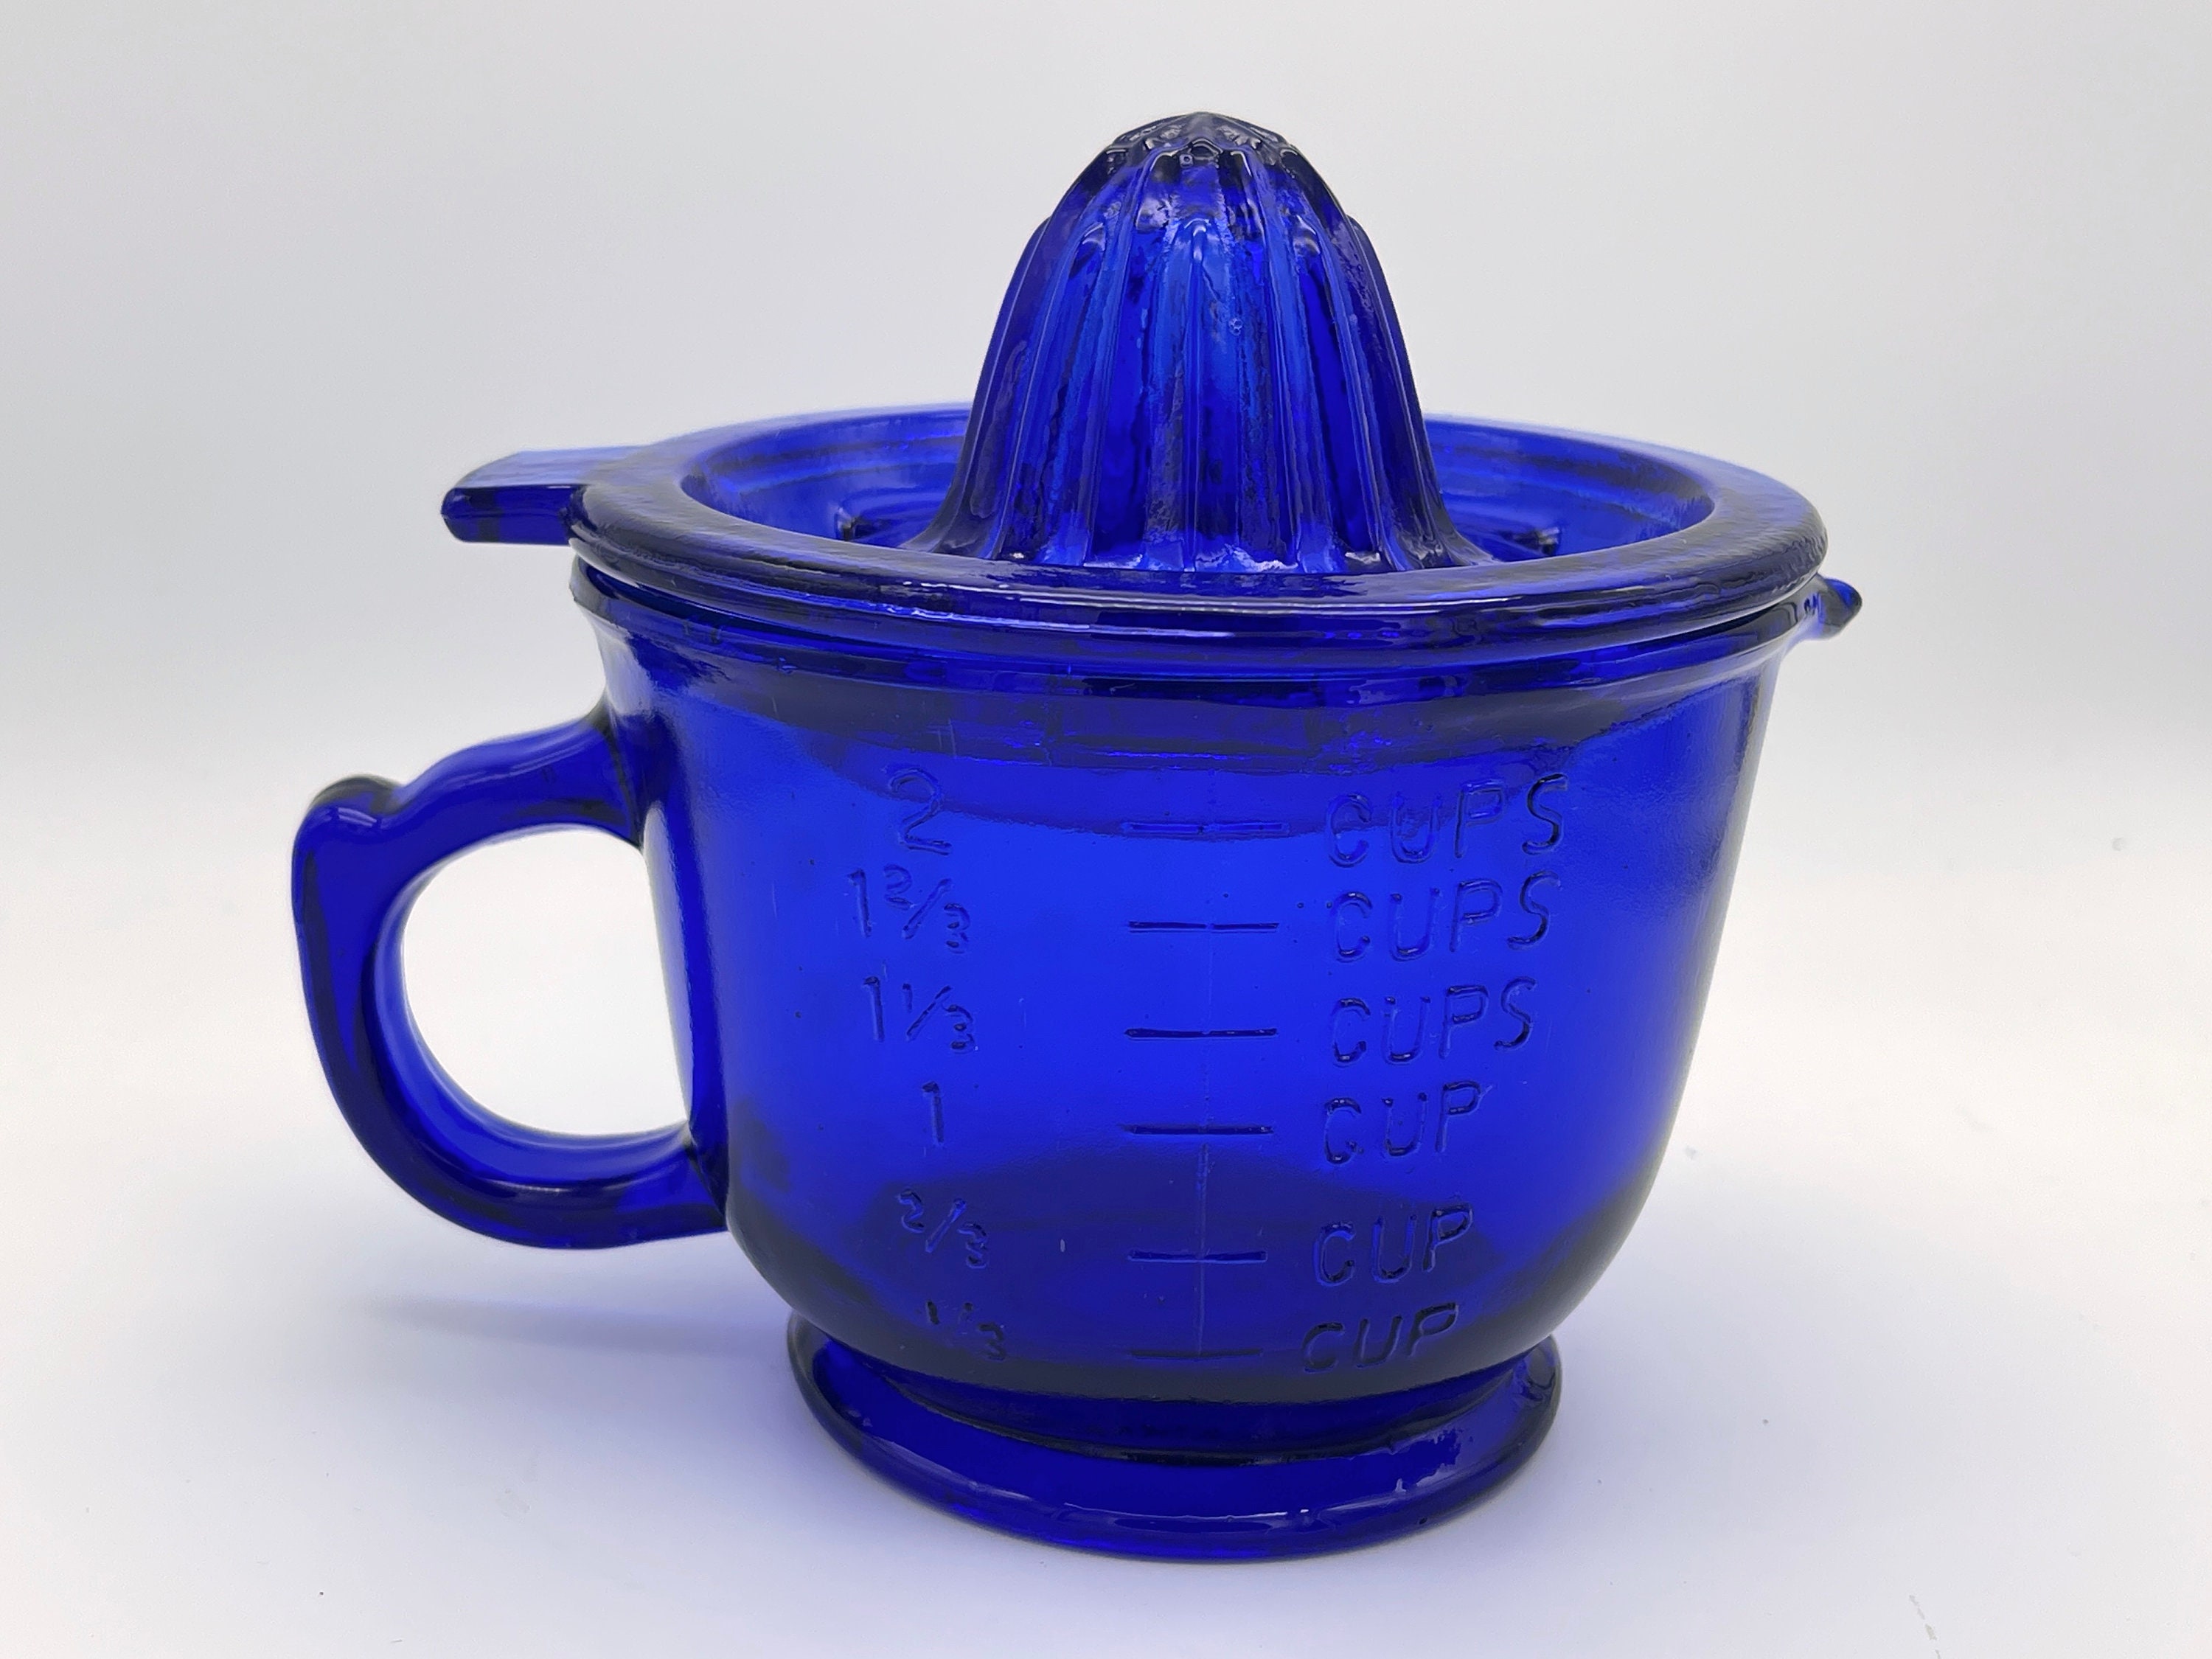 Confusing Measuring Cup with Reamer in Blue Glass